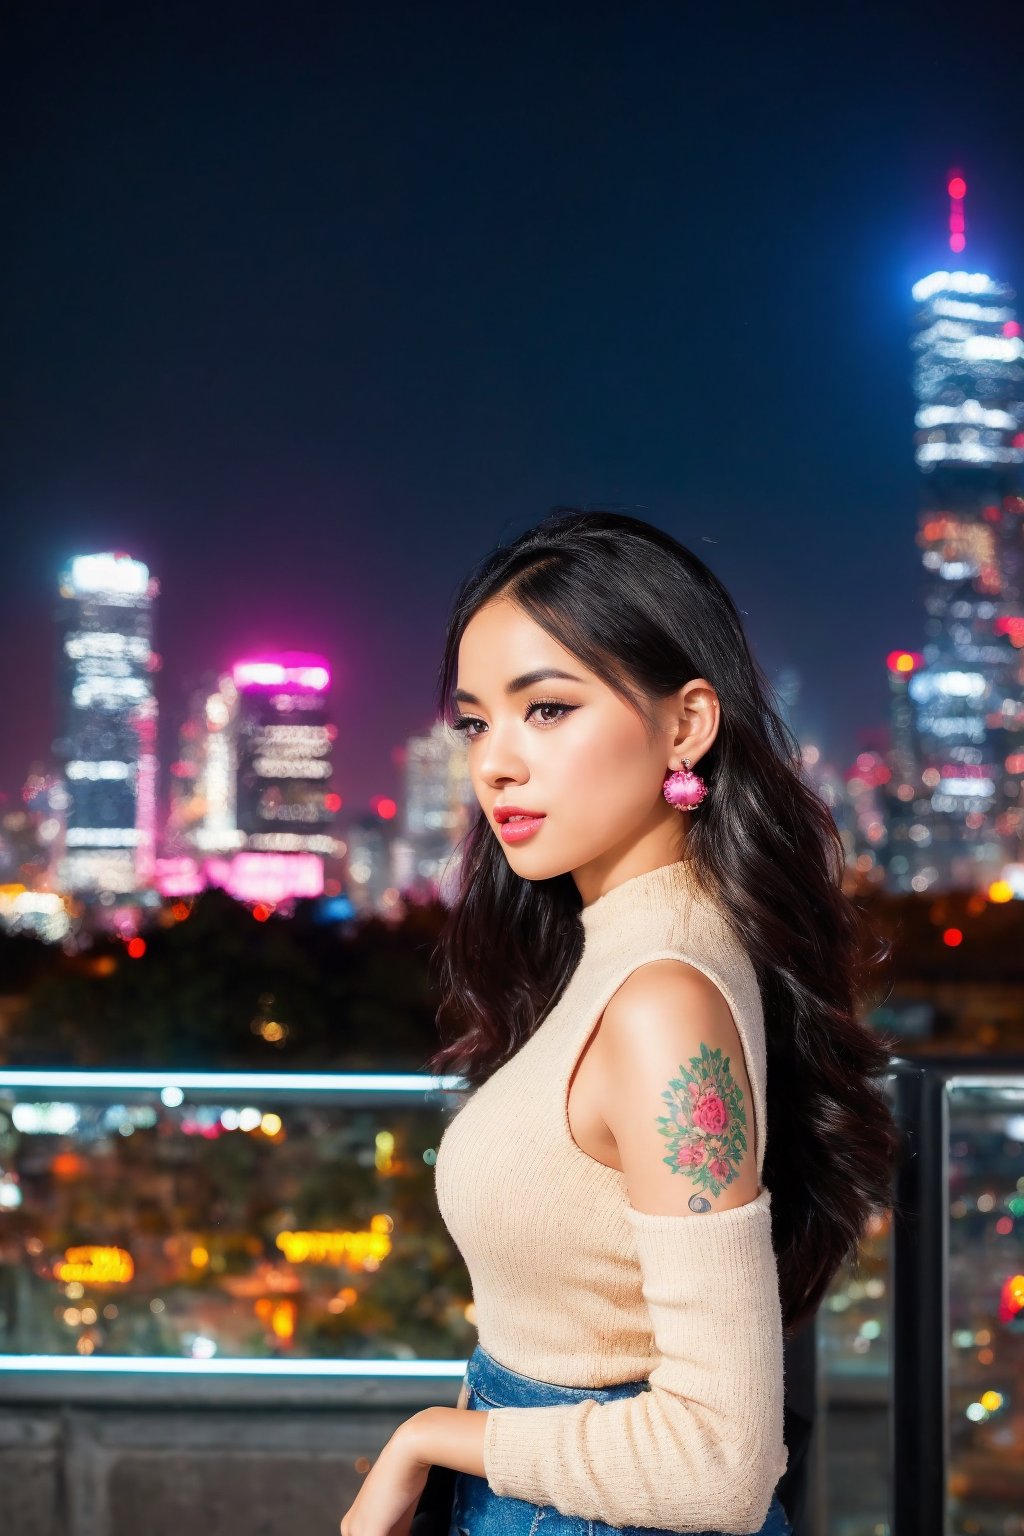 A stunning young woman of African and mixed heritage poses confidently in a bustling cityscape. Her oval-shaped face is framed by the urban landscape's steel and glass skyscrapers. Frosty pink lips gleam under the soft glow of neon lights. Delicate small earrings adorn her ears, adding a touch of sophistication to her overall edgy vibe. Intricate details on her tattoo catch the eye, as she stands out against the vibrant city backdrop.